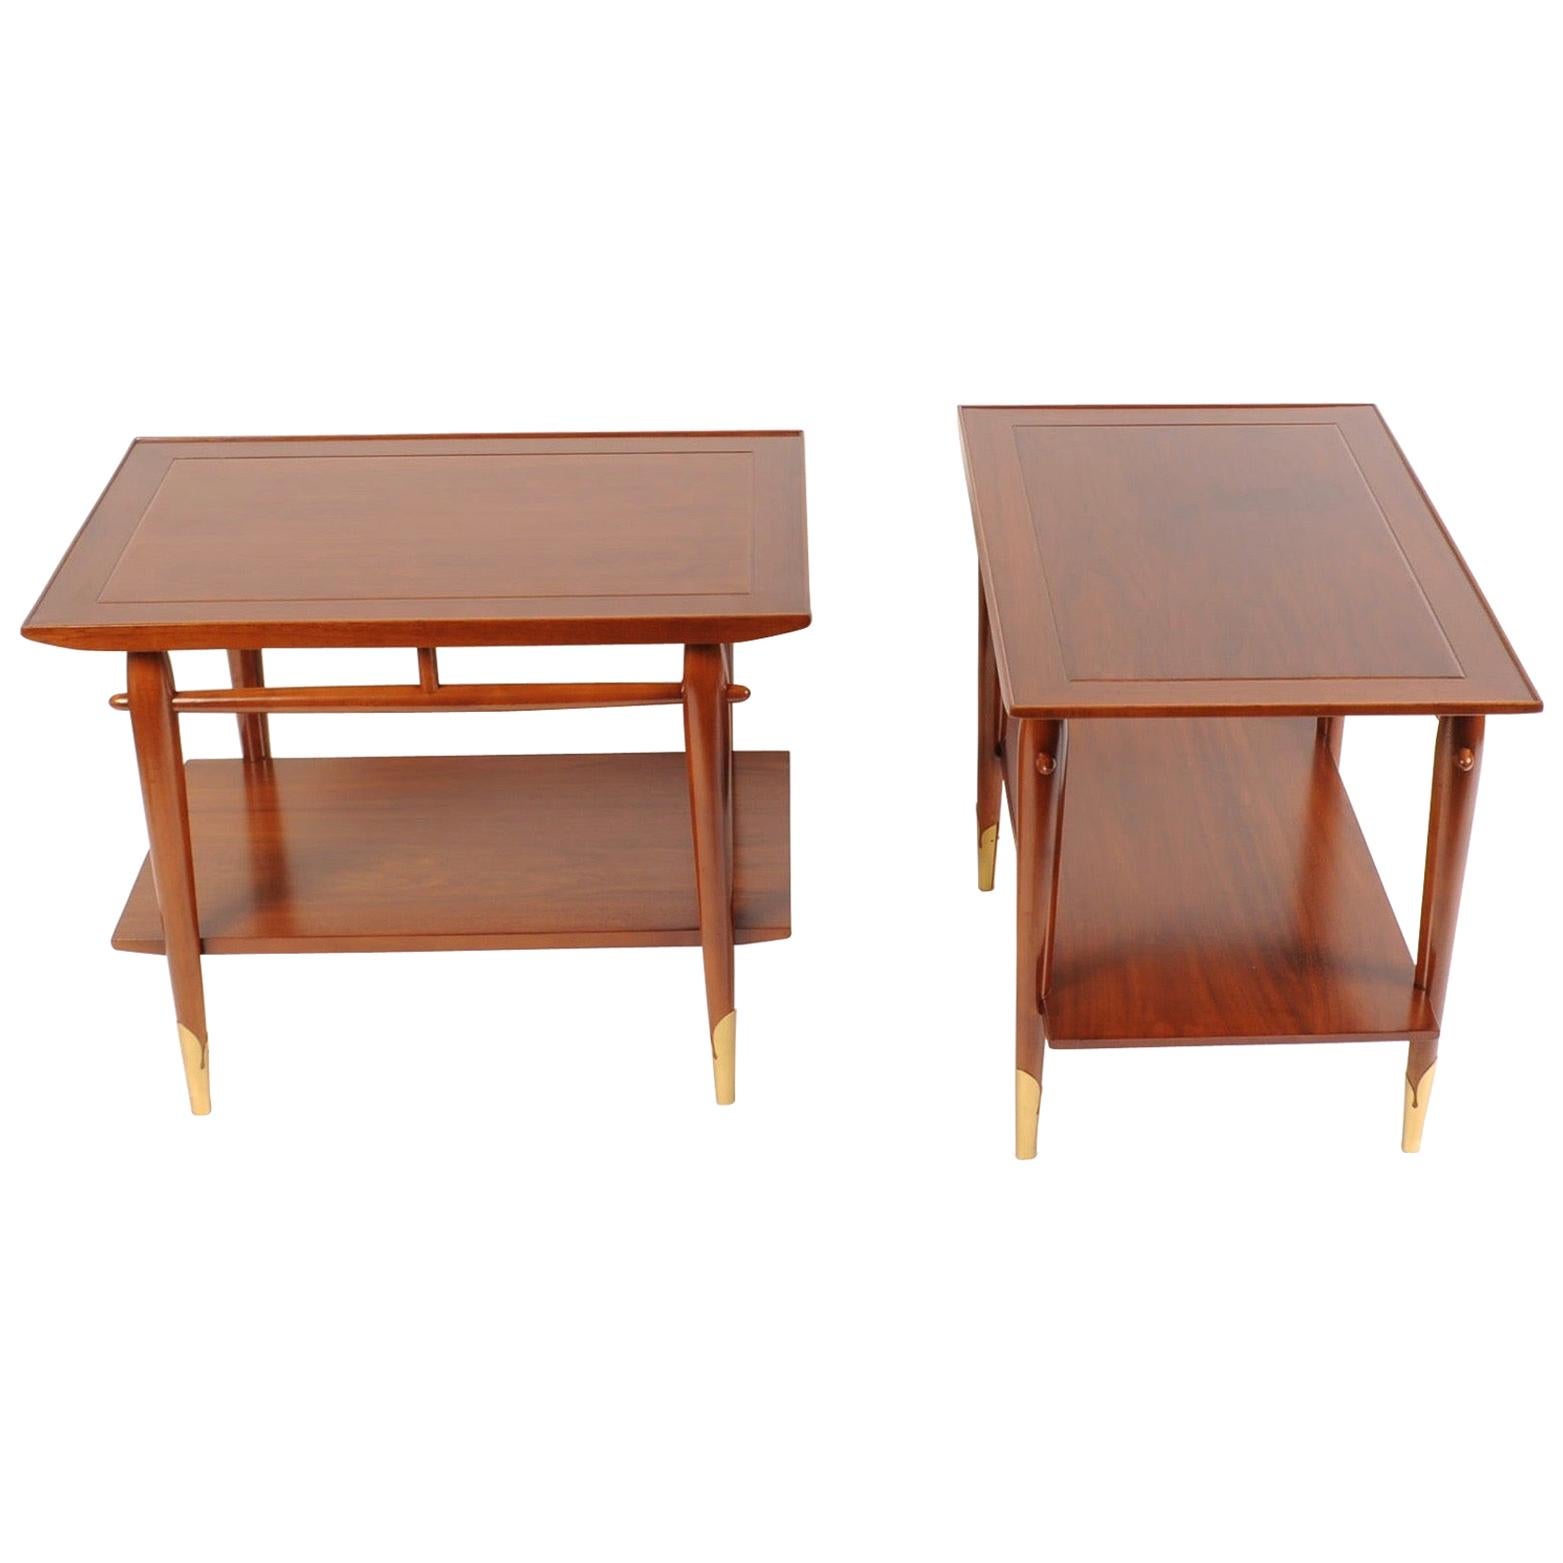 Mid-Century Modern End Tables by Lane